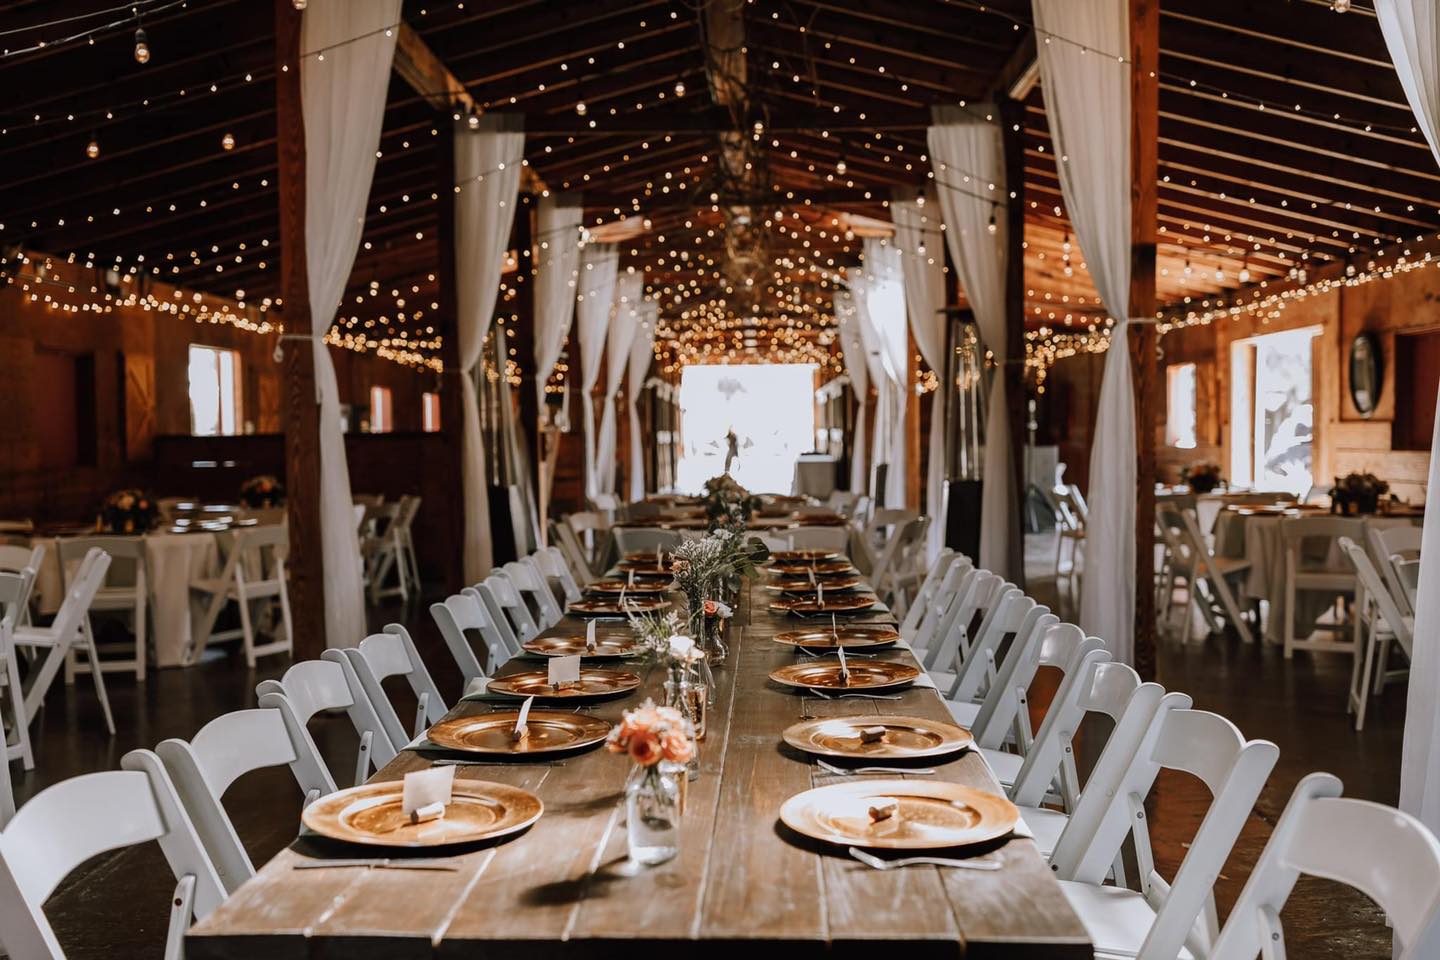 A long dining table flanked by white chairs in a barn setting.